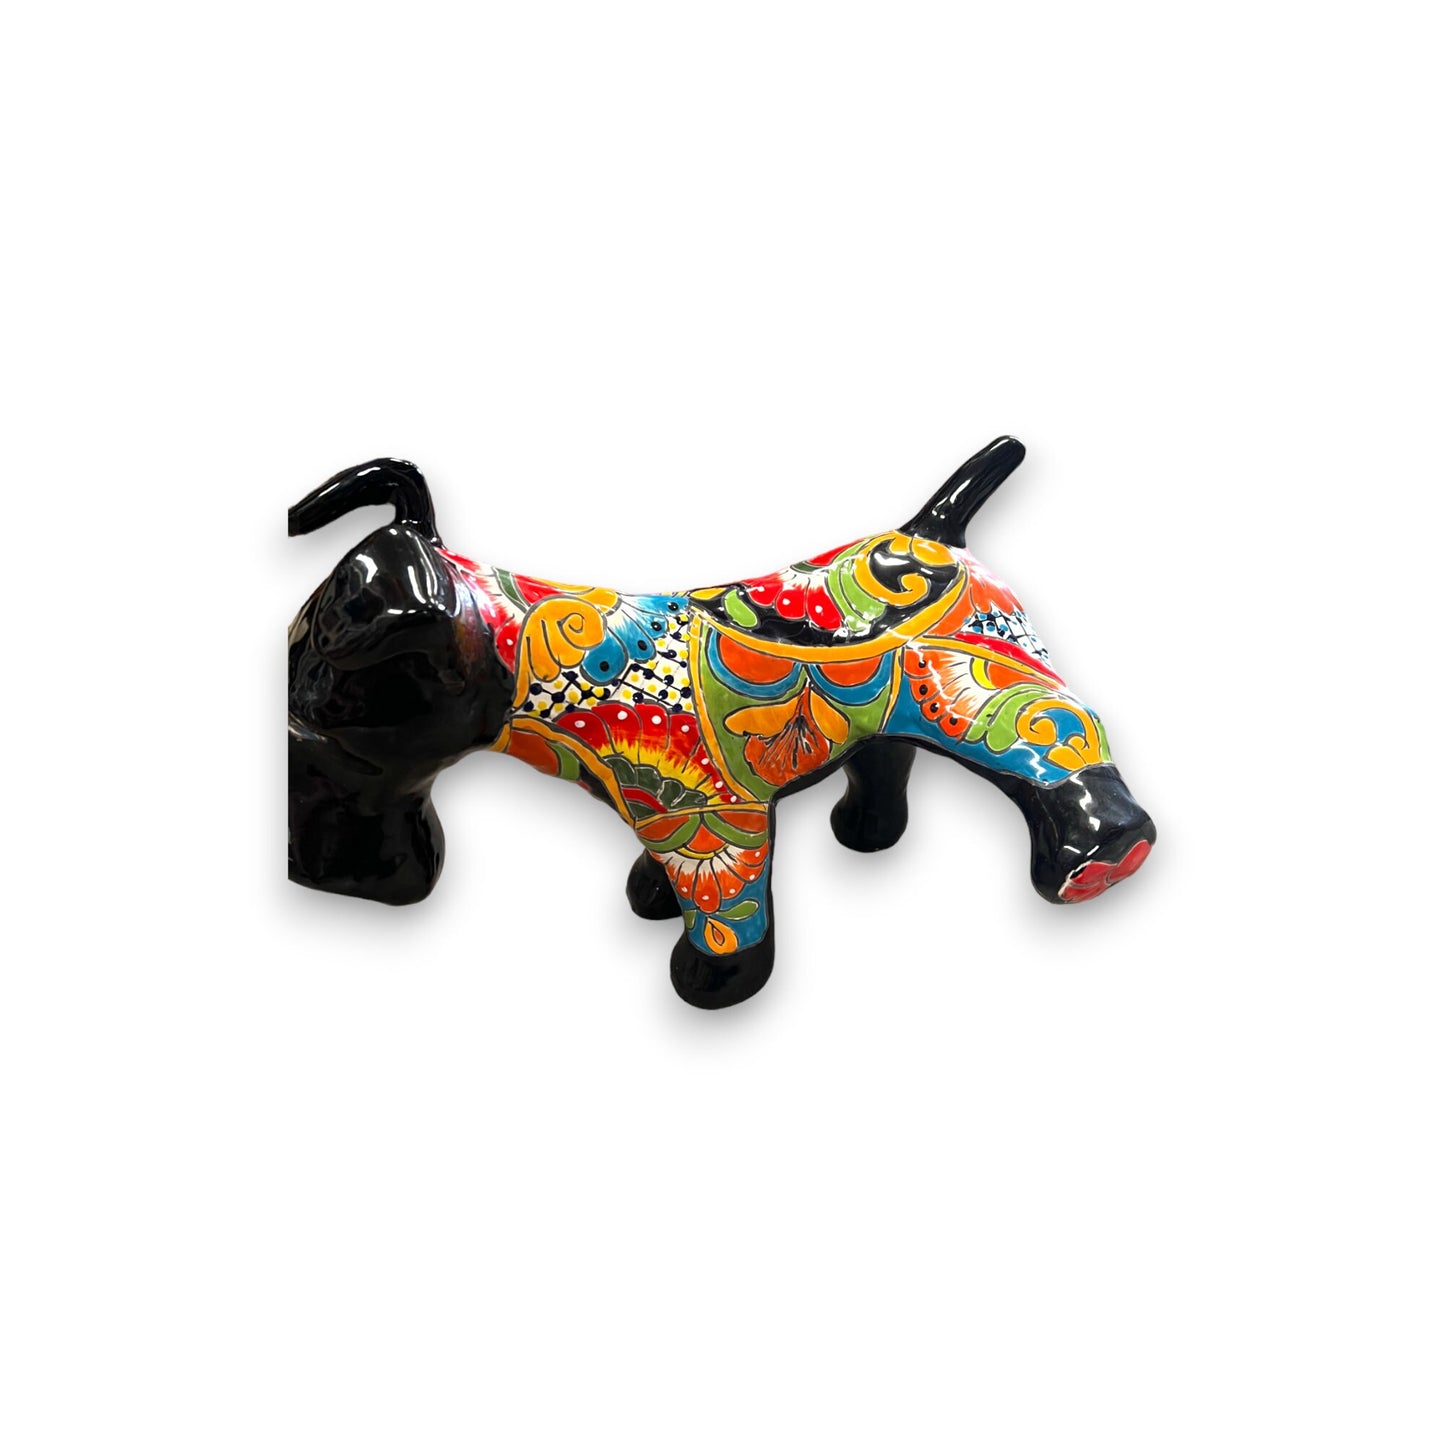 Vibrant Talavera Dog Sculpture | Colorful Hand-Painted Large Mexican Art Piece